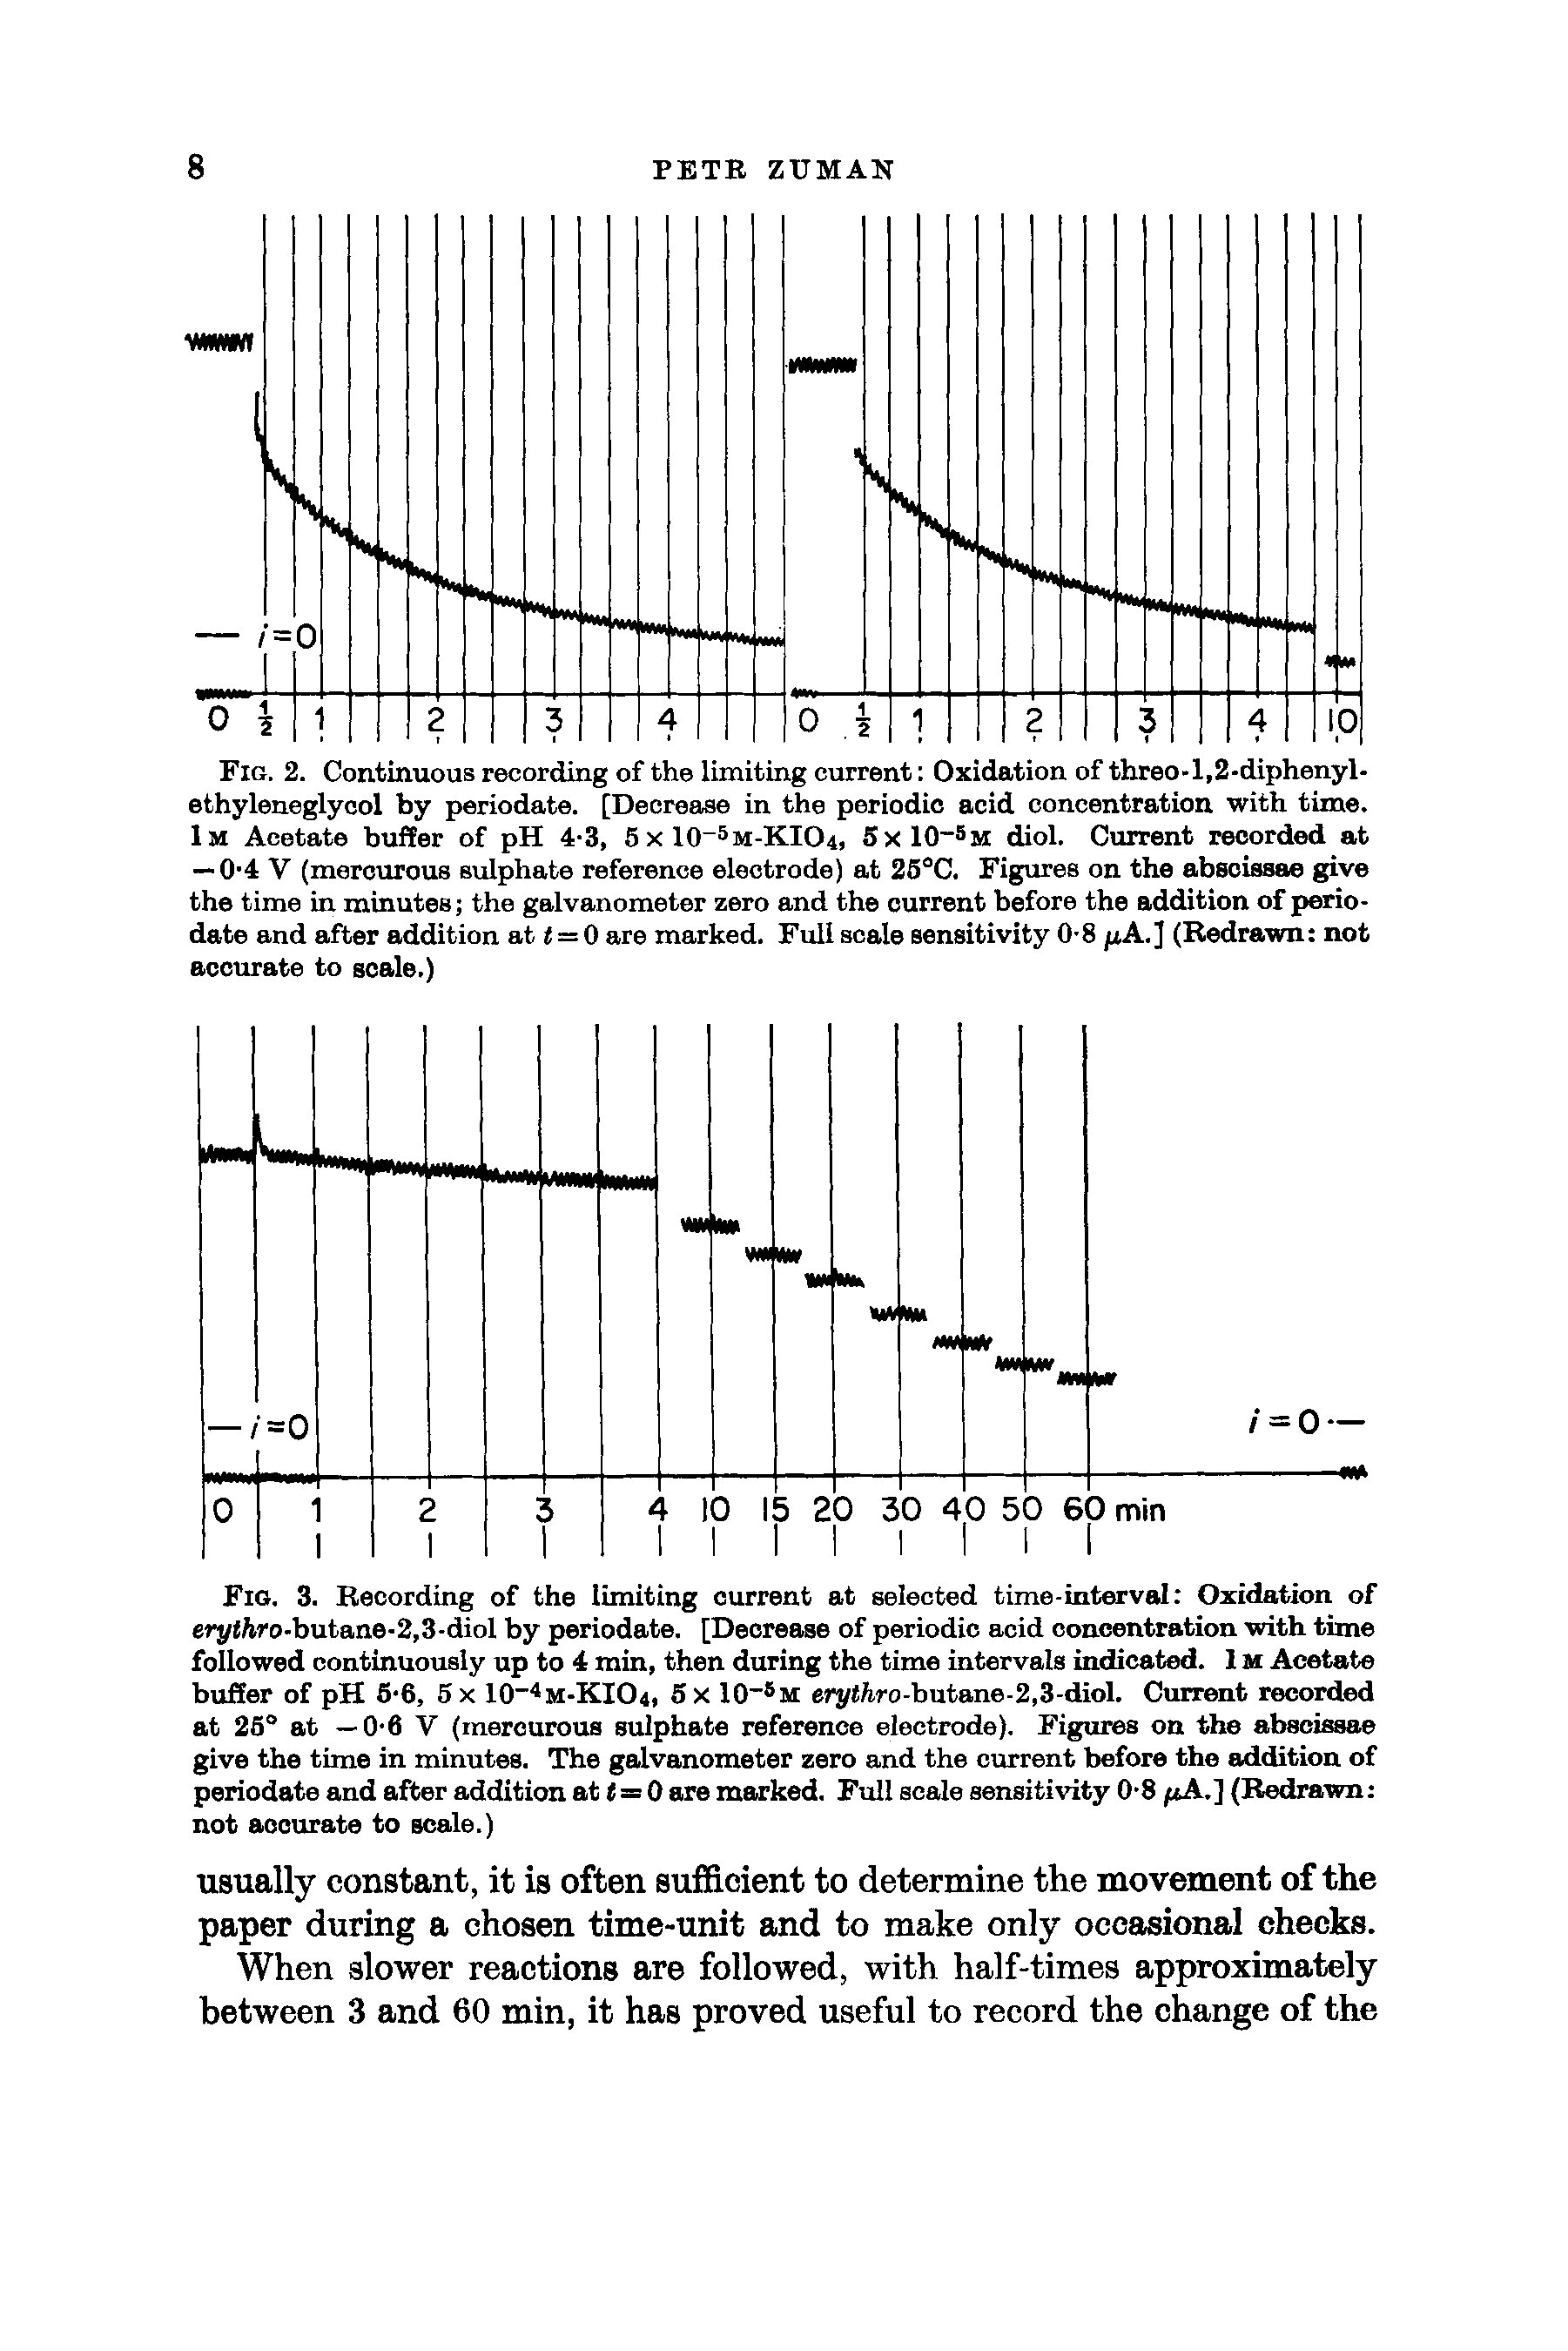 Fig. 2. Continuous recording of the limiting current Oxidation of threo-1,2-diphenyl-ethyleneglycol by periodate. [Decrease in the periodic acid concentration with time. 1m Acetate buffer of pH 4-3, 5 x 10 5m-KIO4, 5x10 5m diol. Current recorded at — 0-4 V (mercurous sulphate reference electrode) at 25°C. Figures on the abscissae give the time in minutes the galvanometer zero and the current before the addition of periodate and after addition at i = 0 are marked. Full scale sensitivity 0-8 pA.] (Redrawn not accurate to scale.)...